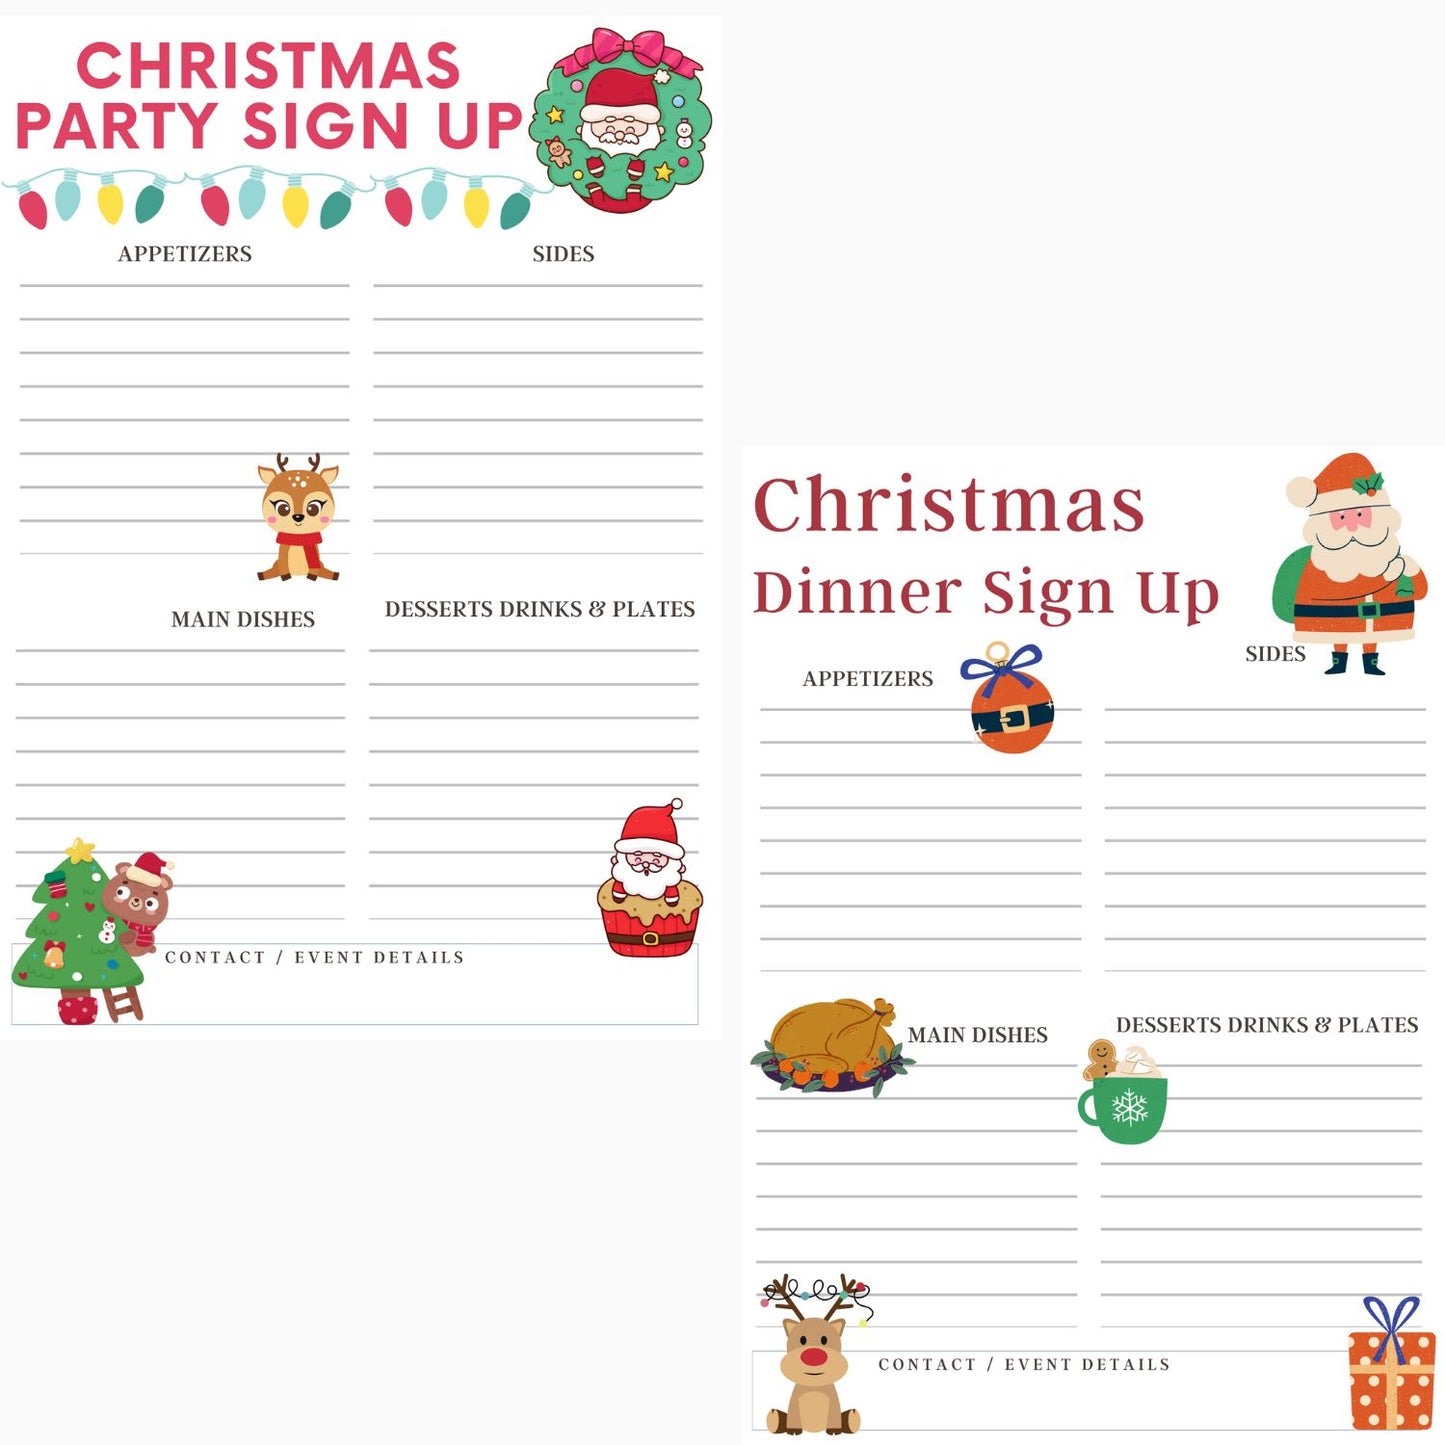 Screenshot preview of two unique Christmas Sign Up Sheets! They are both printable PDFs with a place to sign up for appetizers, sides, main dishes, desserts, drinks, and plates, as well as, a plate to include event details and contact information.